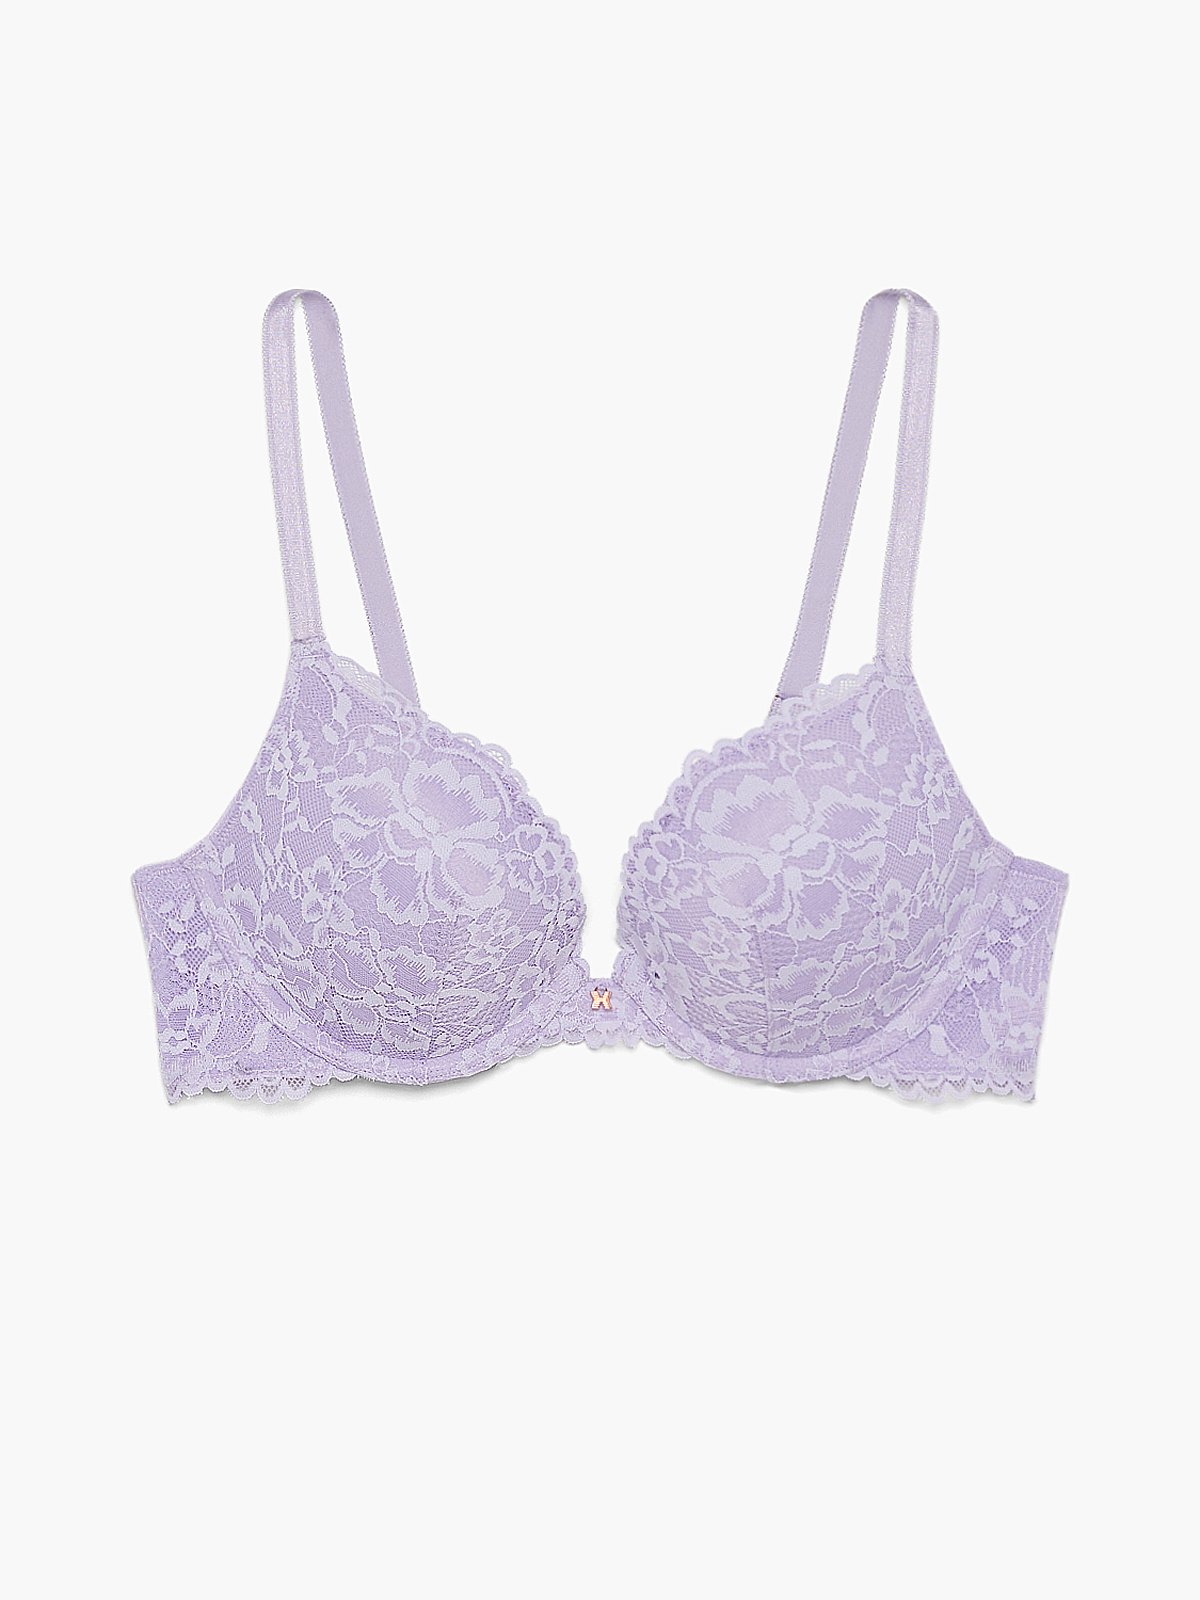 Style Double Push Wired Push Up Bra in Lavender Mist